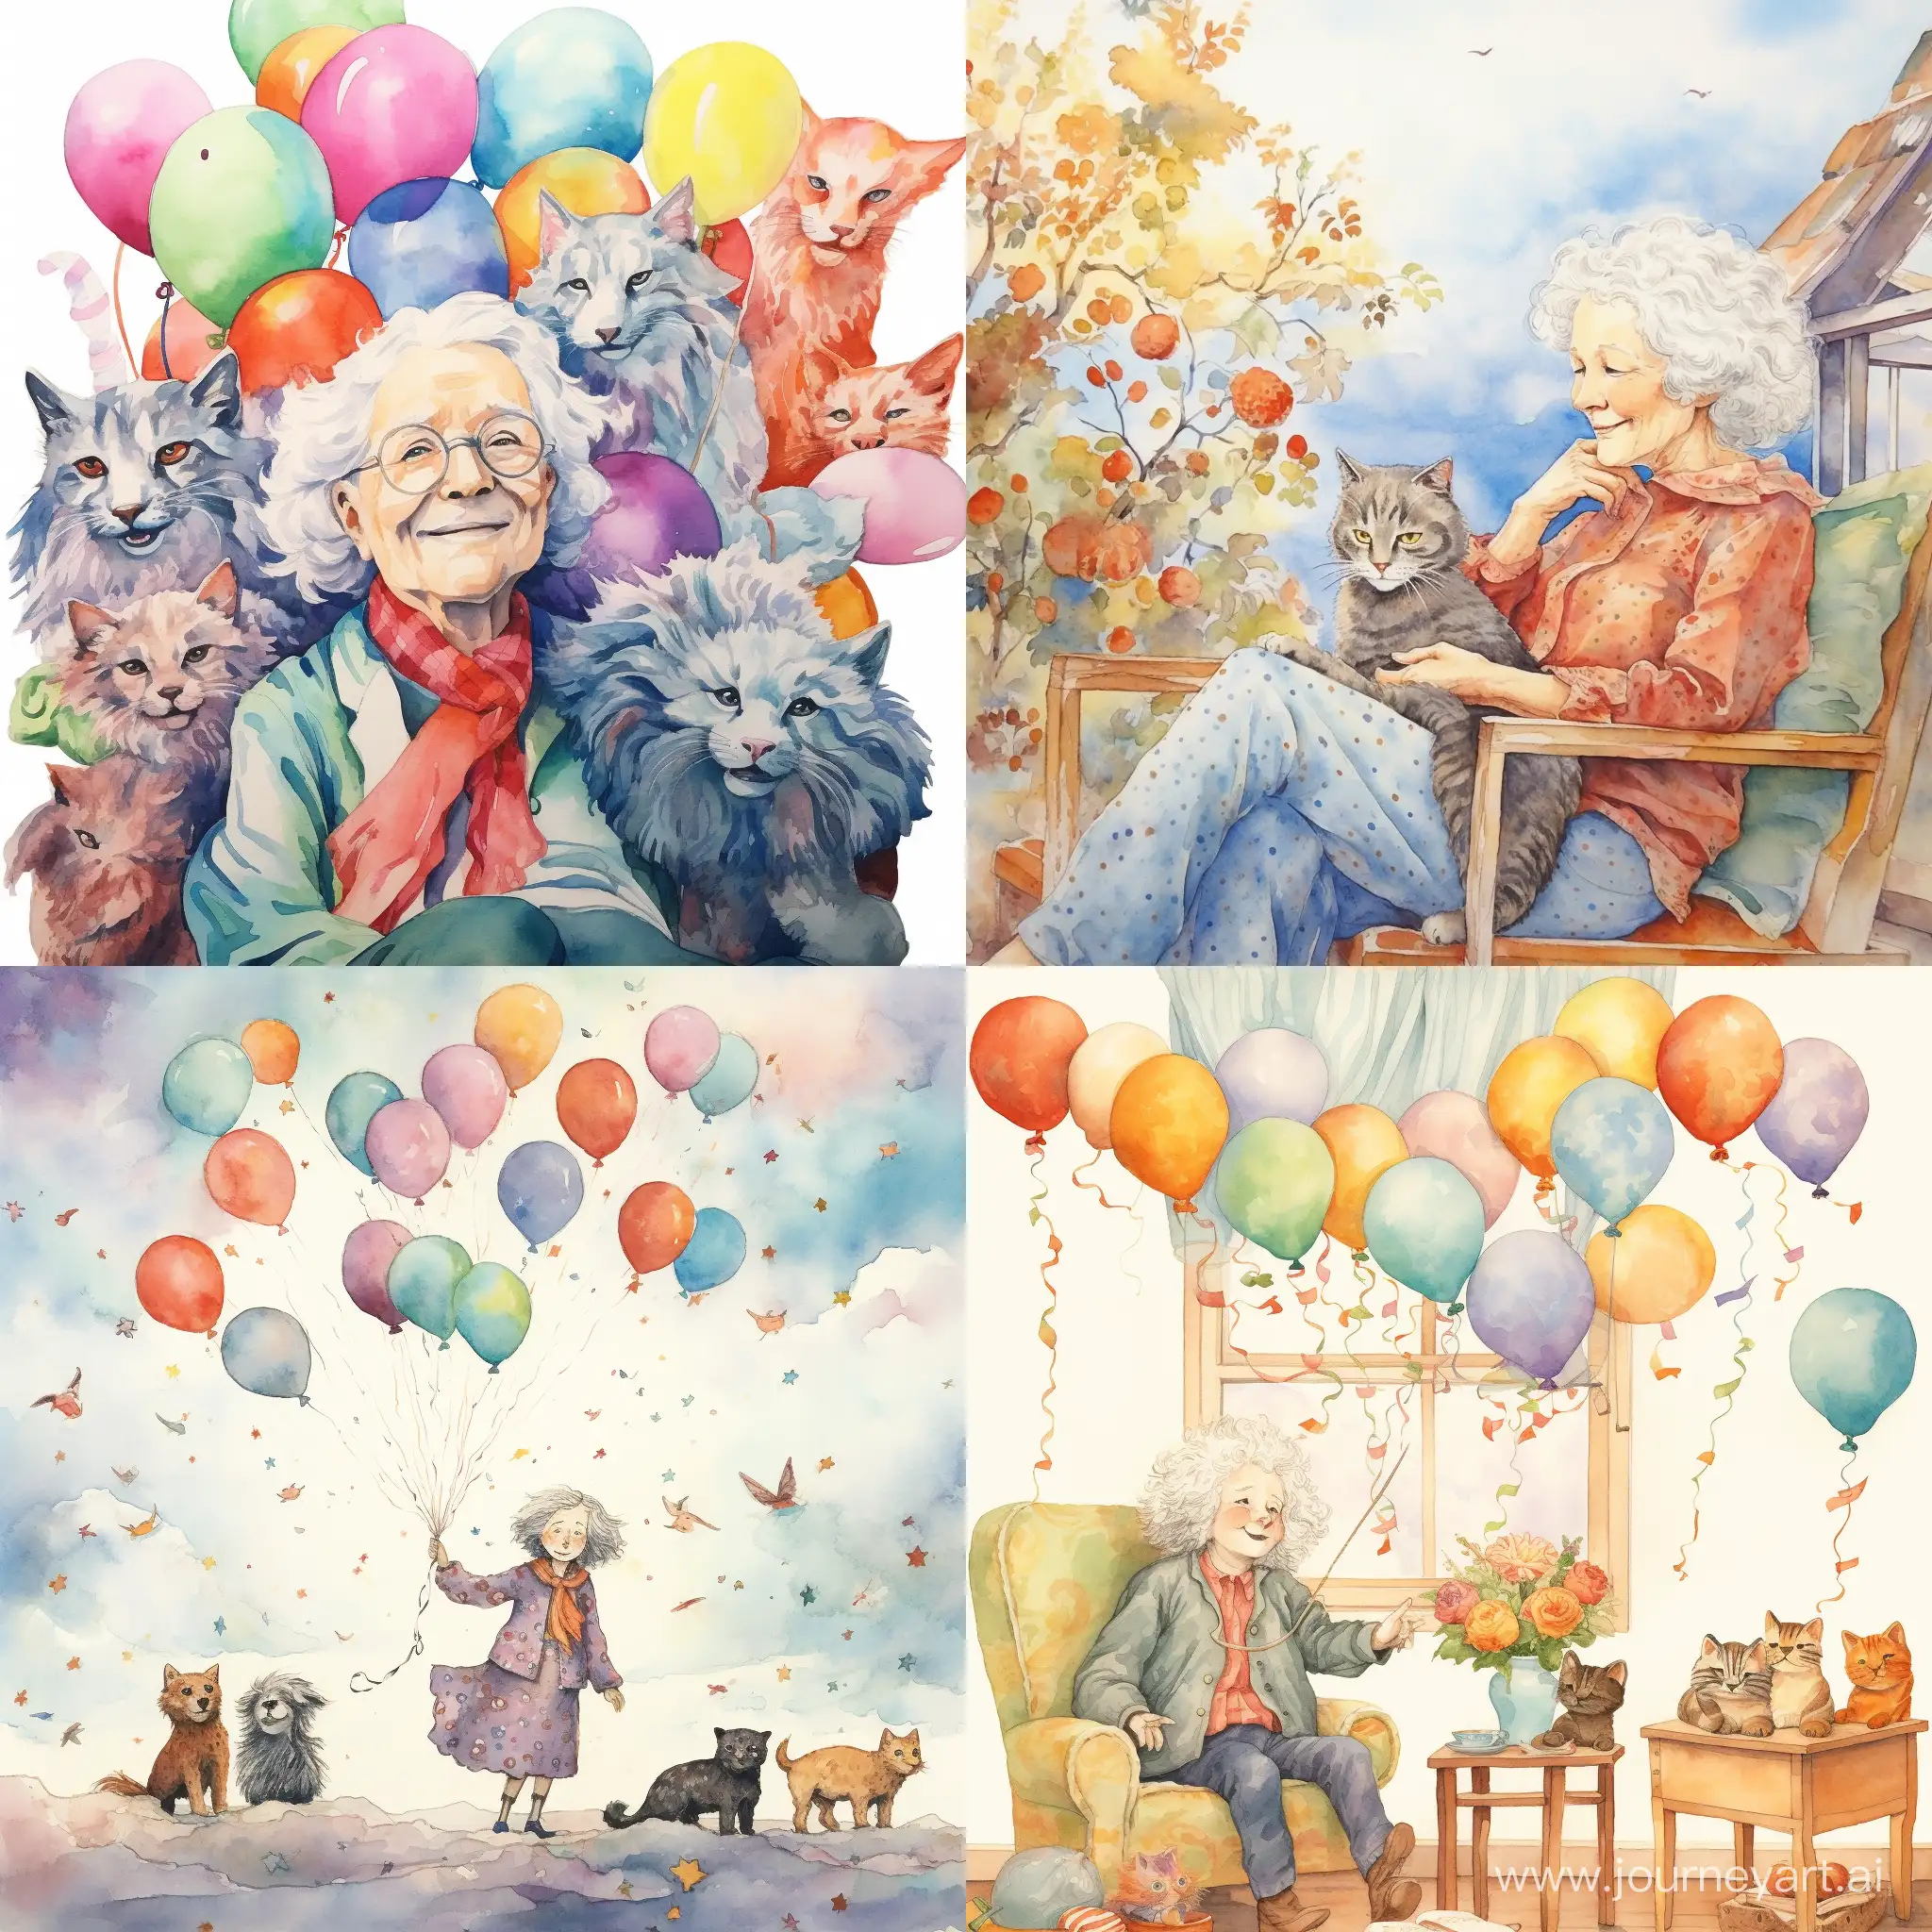 illustration whimsical style watercolor Judith Kerr,